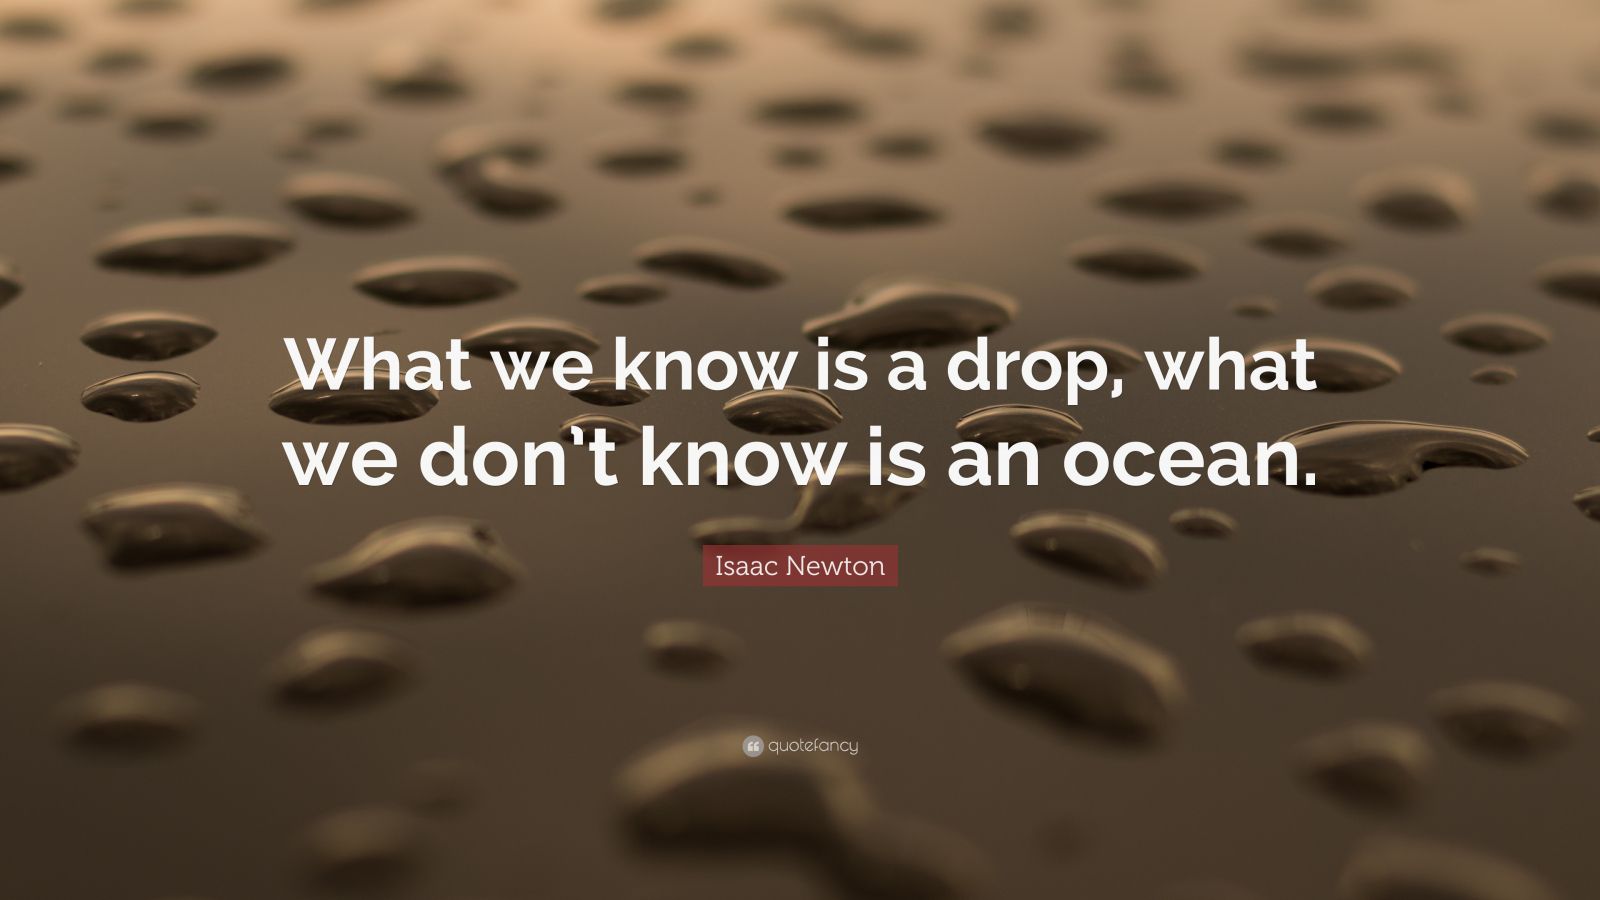 Isaac Newton Quote: “What we know is a drop, what we don’t know is an